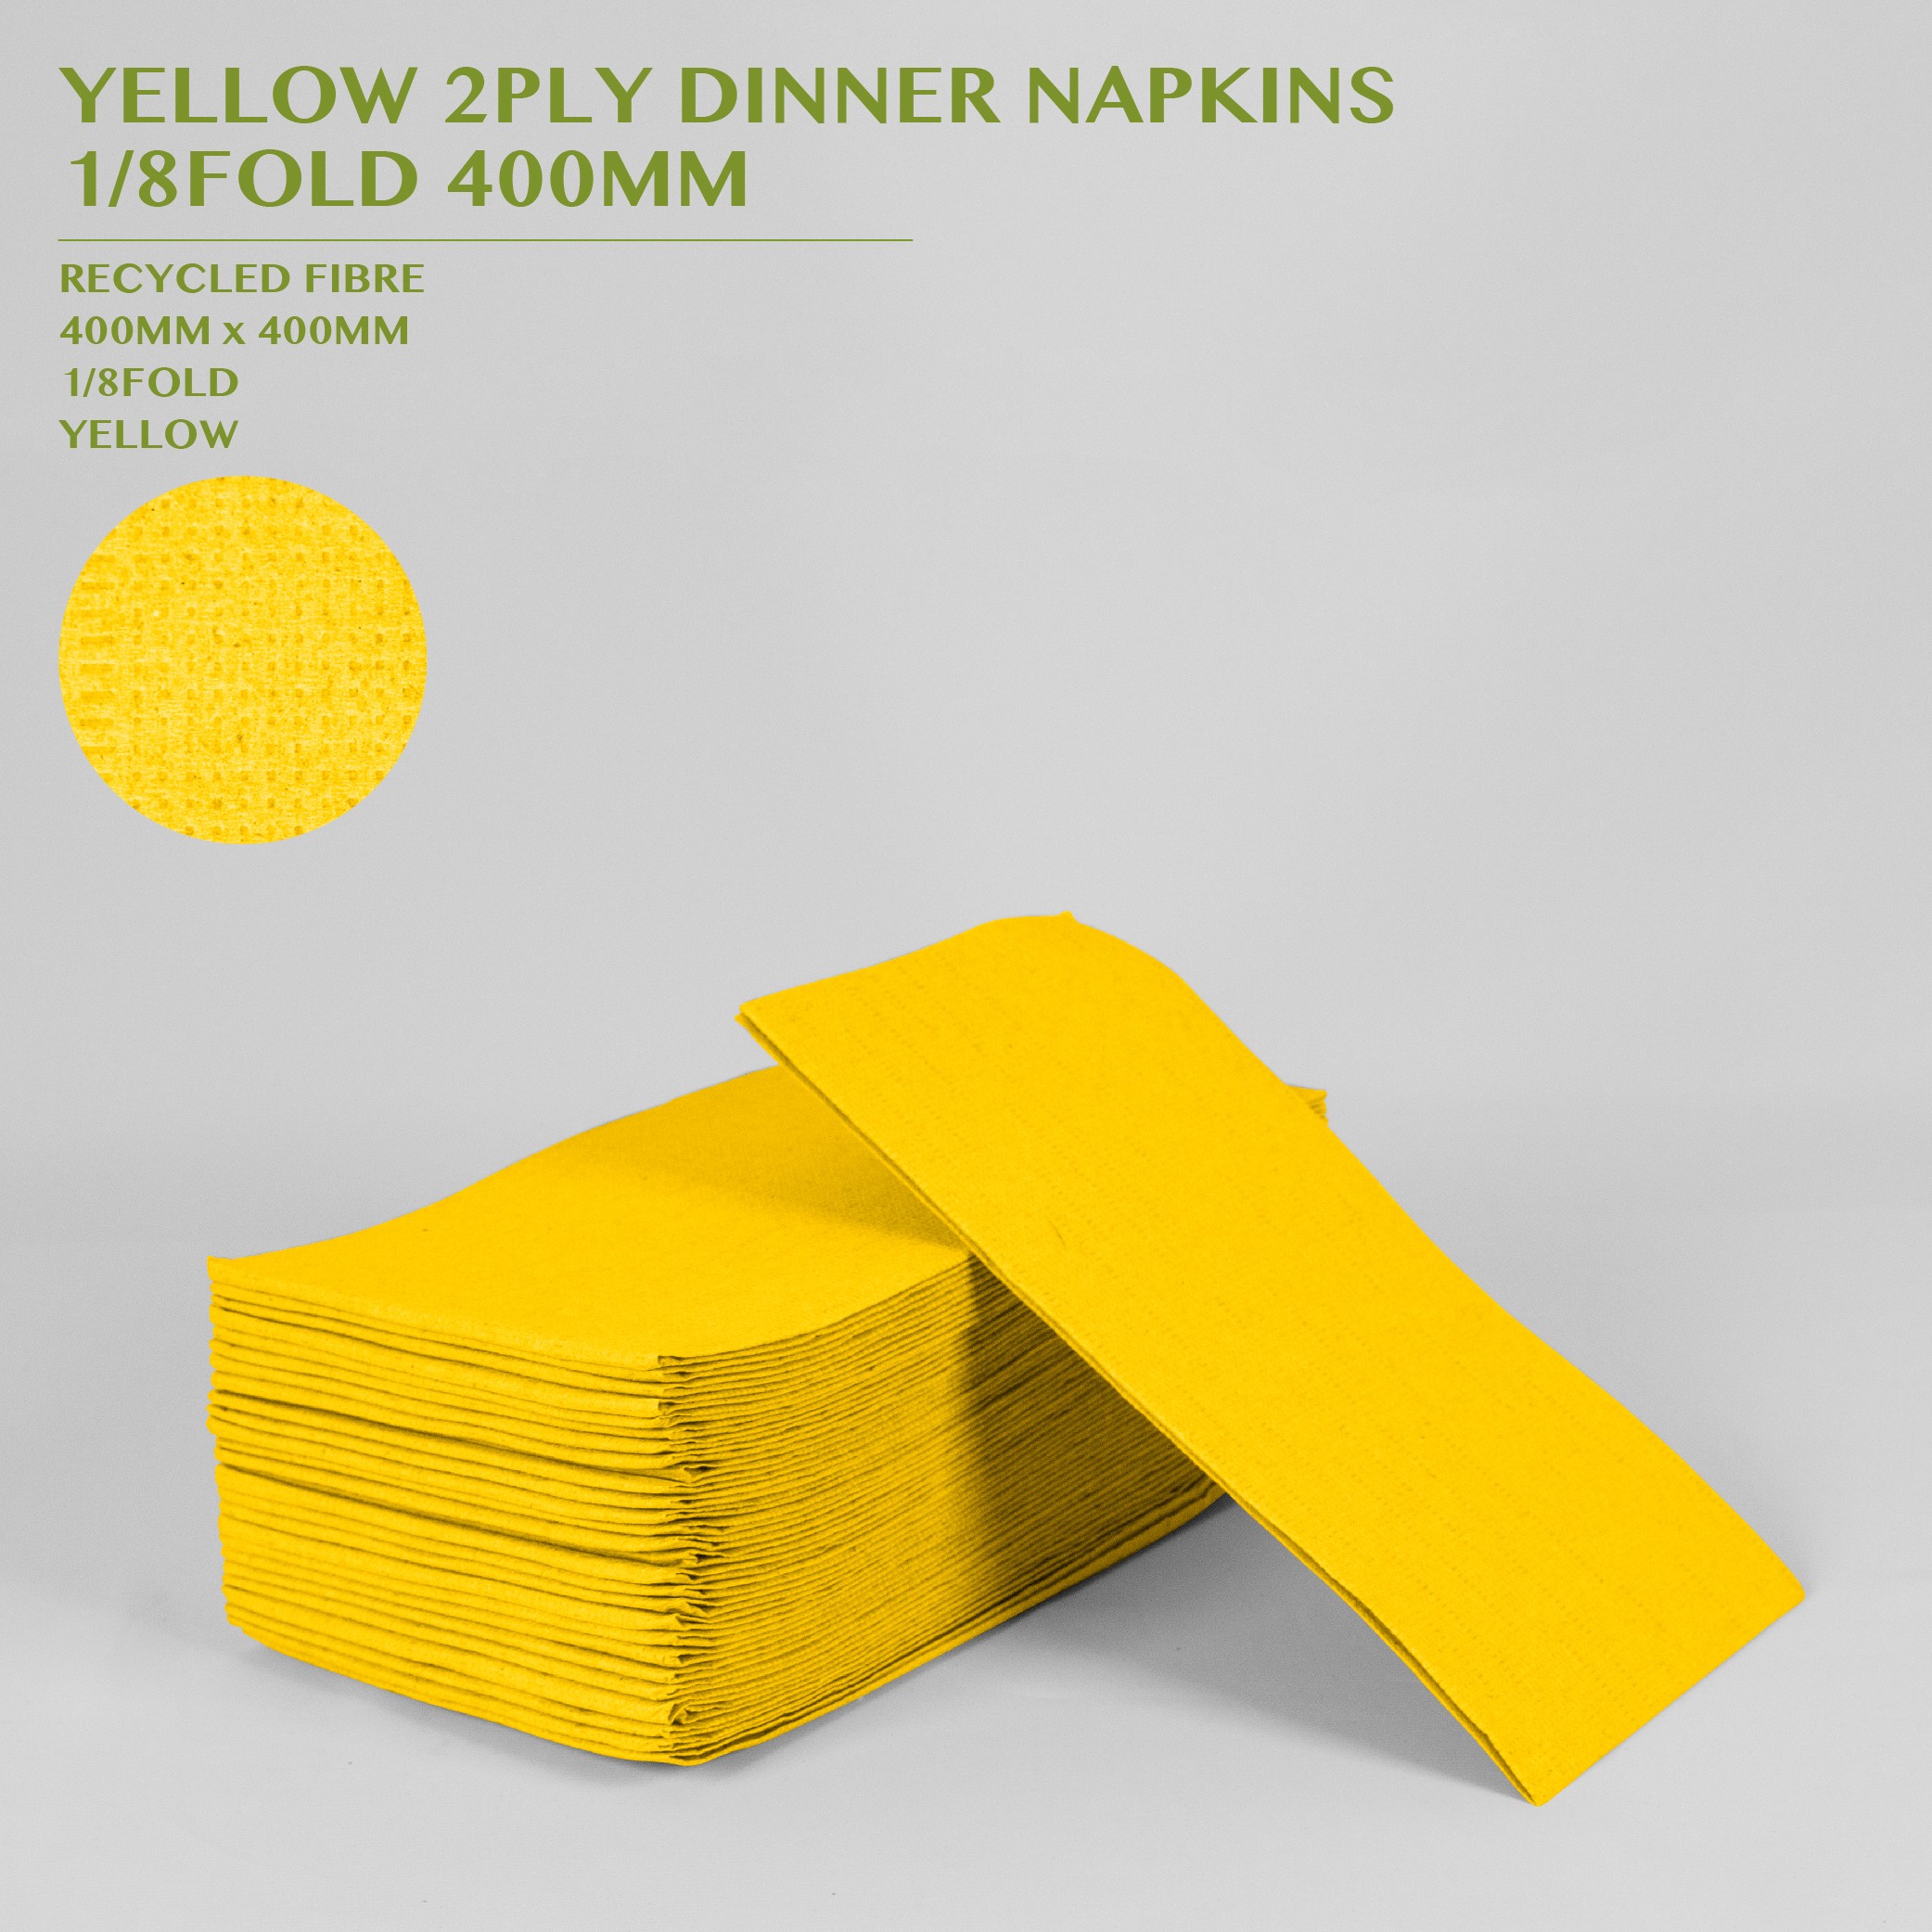 PRE-ORDER YELLOW 2PLY DINNER NAPKINS  1/8FOLD 400MM 100PACK